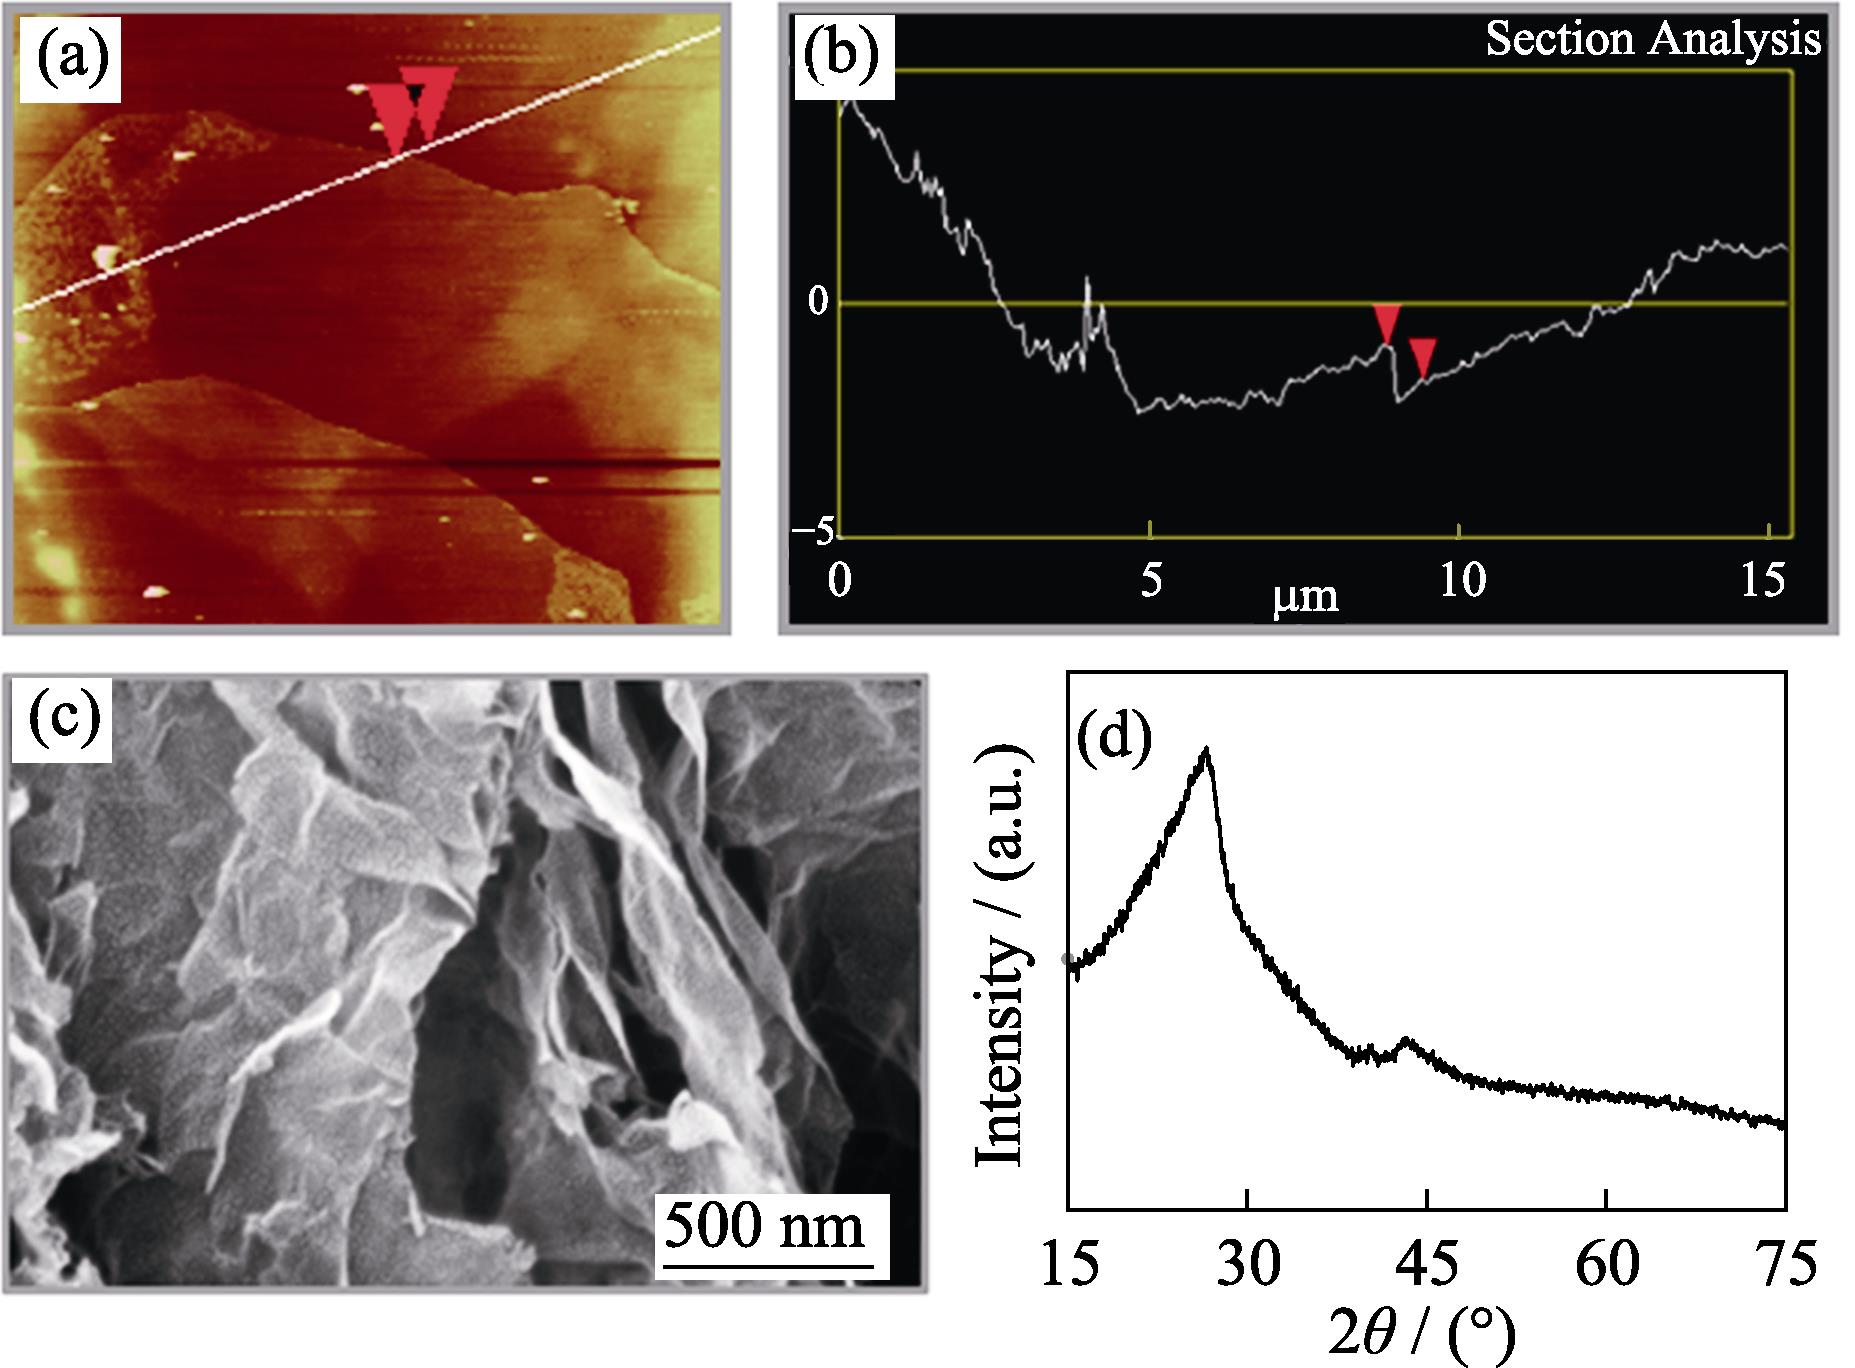 (a) AFM image and (b) corresponding thickness curves of graphene, (c) SEM image and (d) XRD pattern of Fe, N-doped porous carbon catalyst